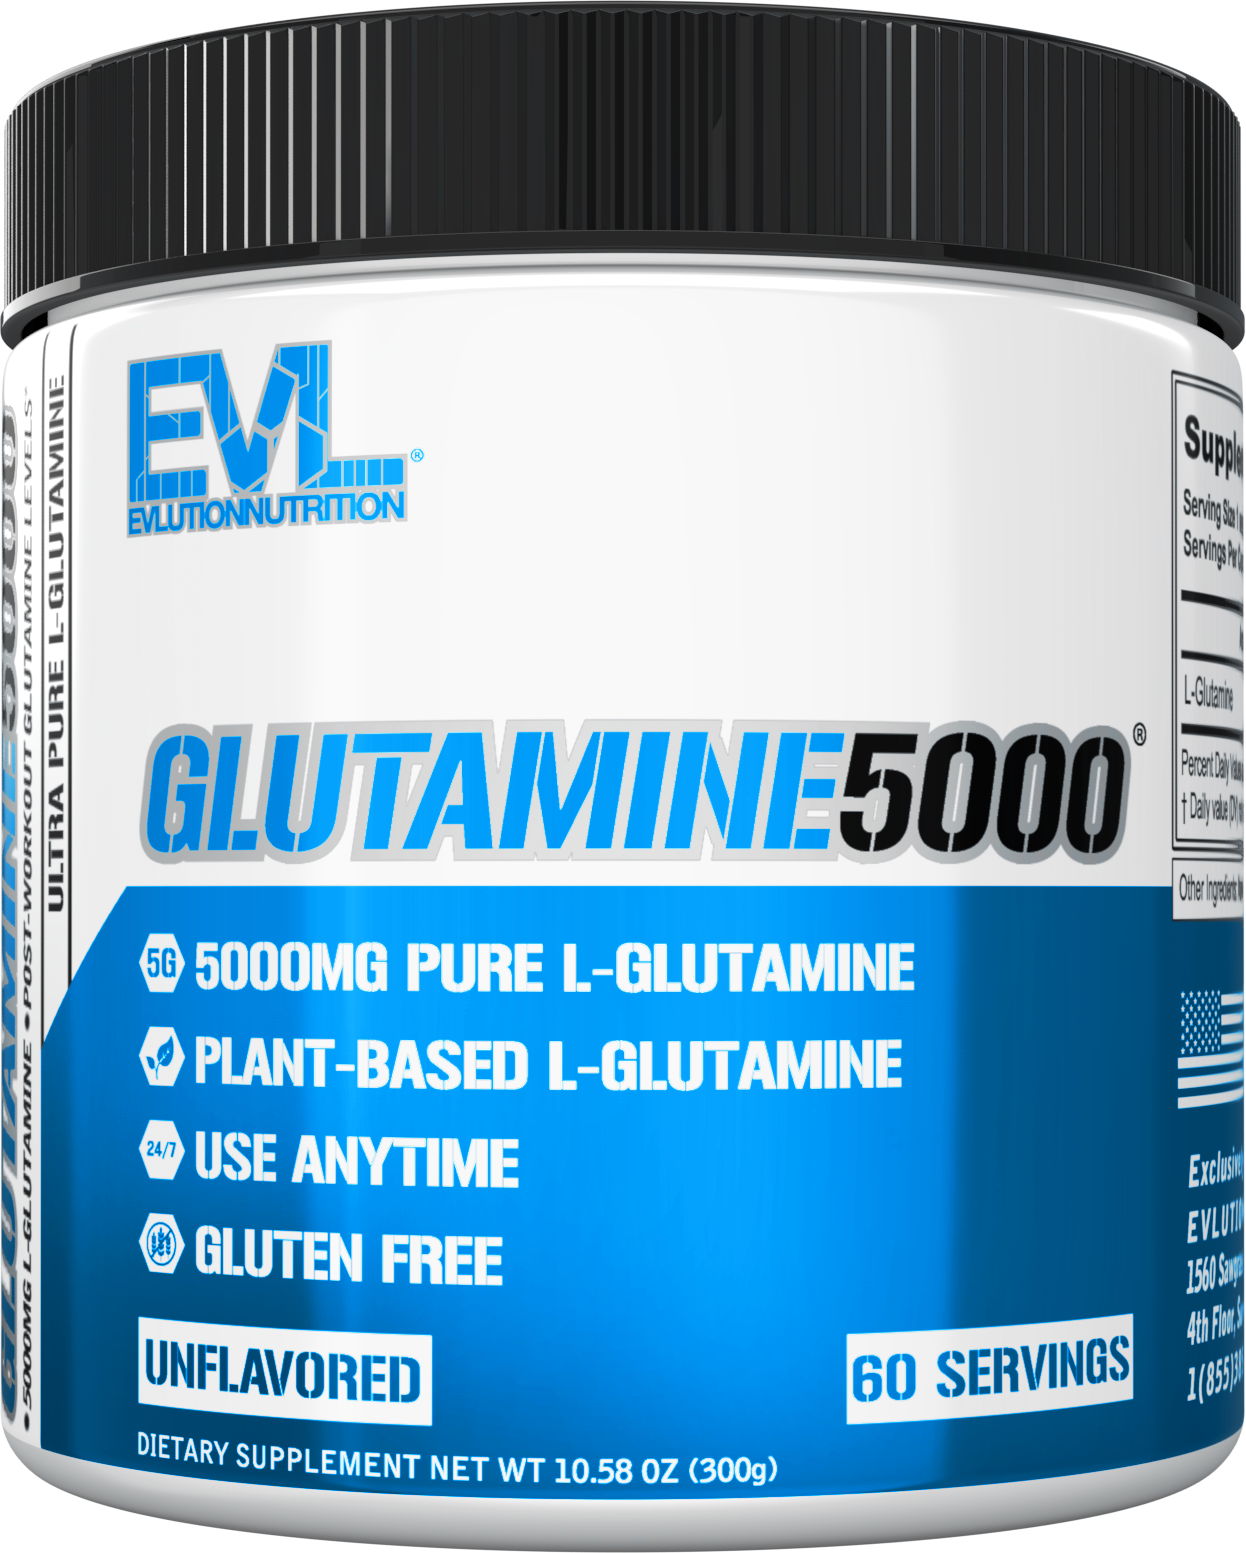 Evlution Nutrition Glutamine 5000 60 Servings Plant Based. , Boost Recovery